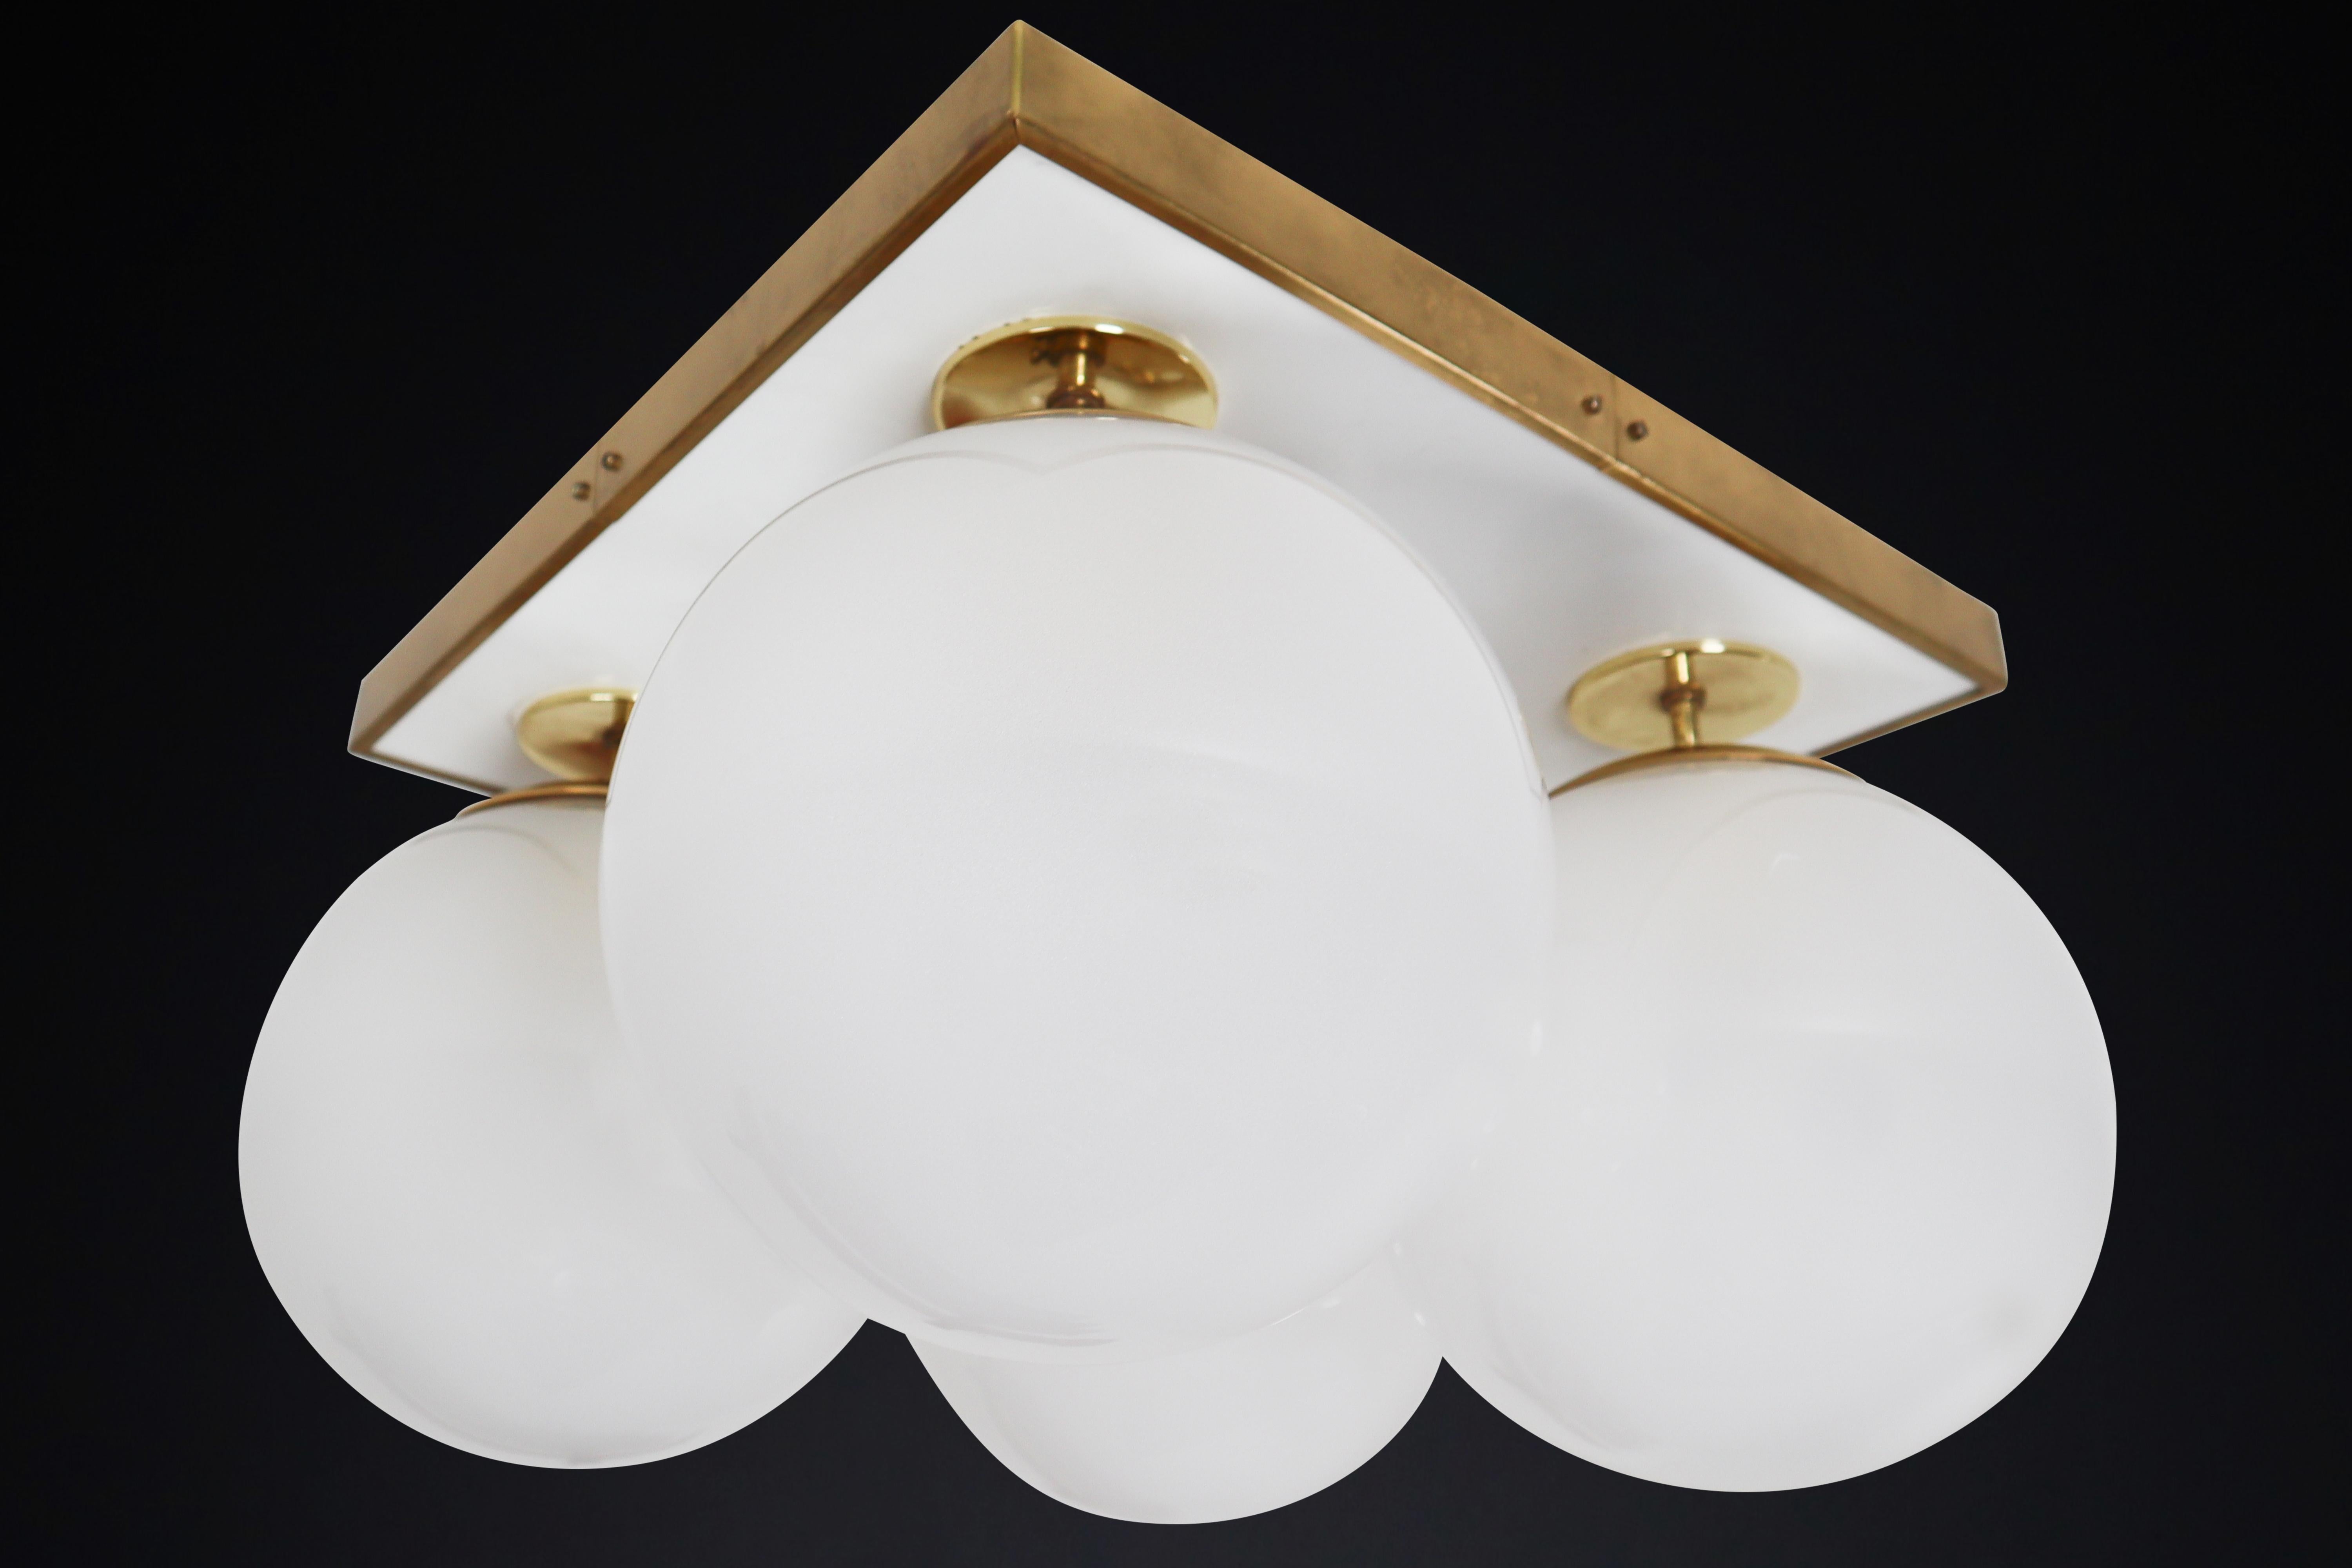 Czech Mid-Century Modern Brass Ceiling Chandeliers with Four Pearl White Glass Globes For Sale